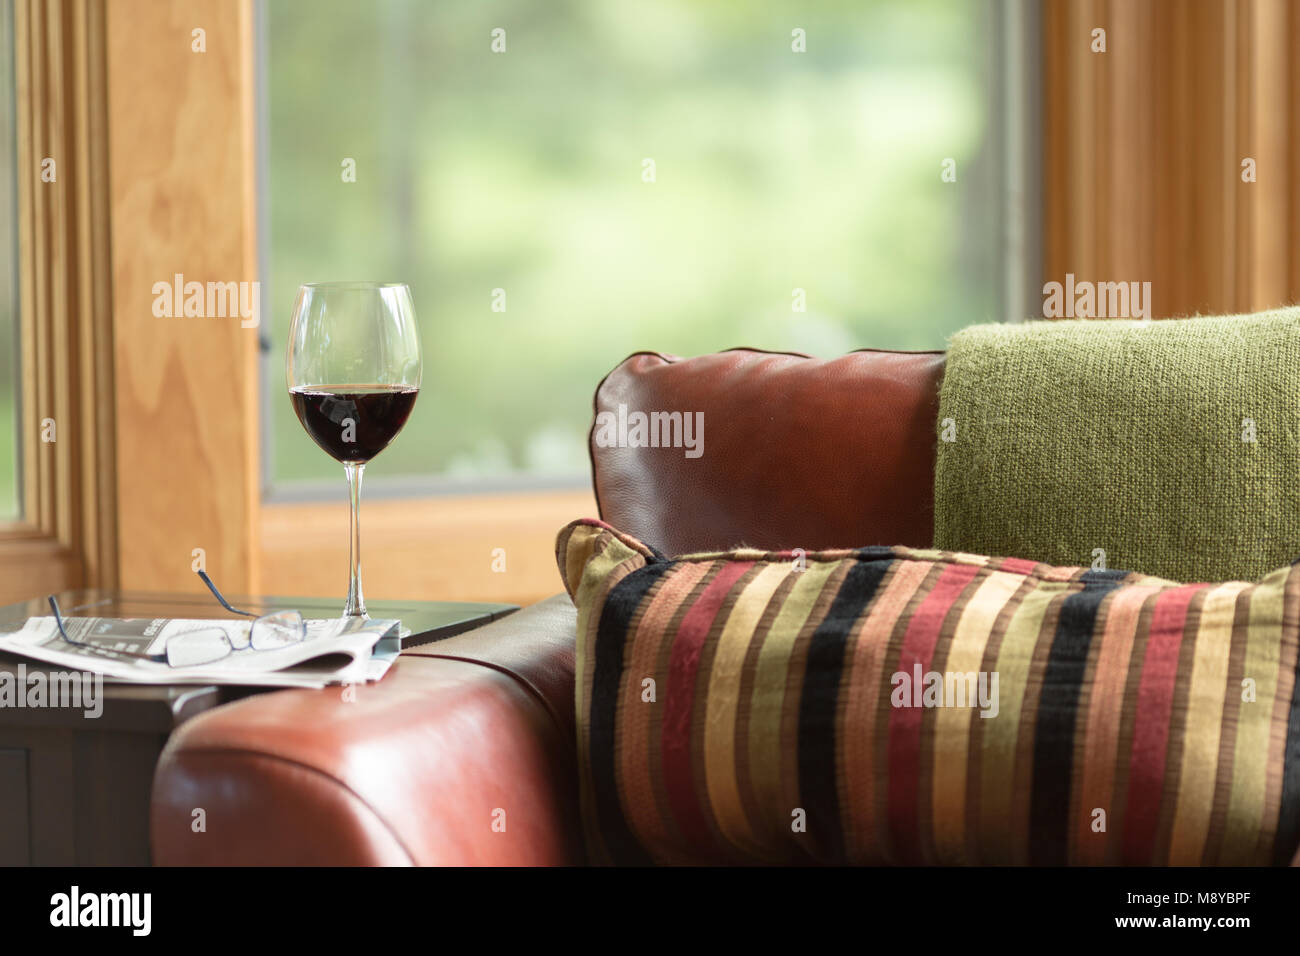 A glass of red wine on a table next to a newspaper and reading glasses Stock Photo